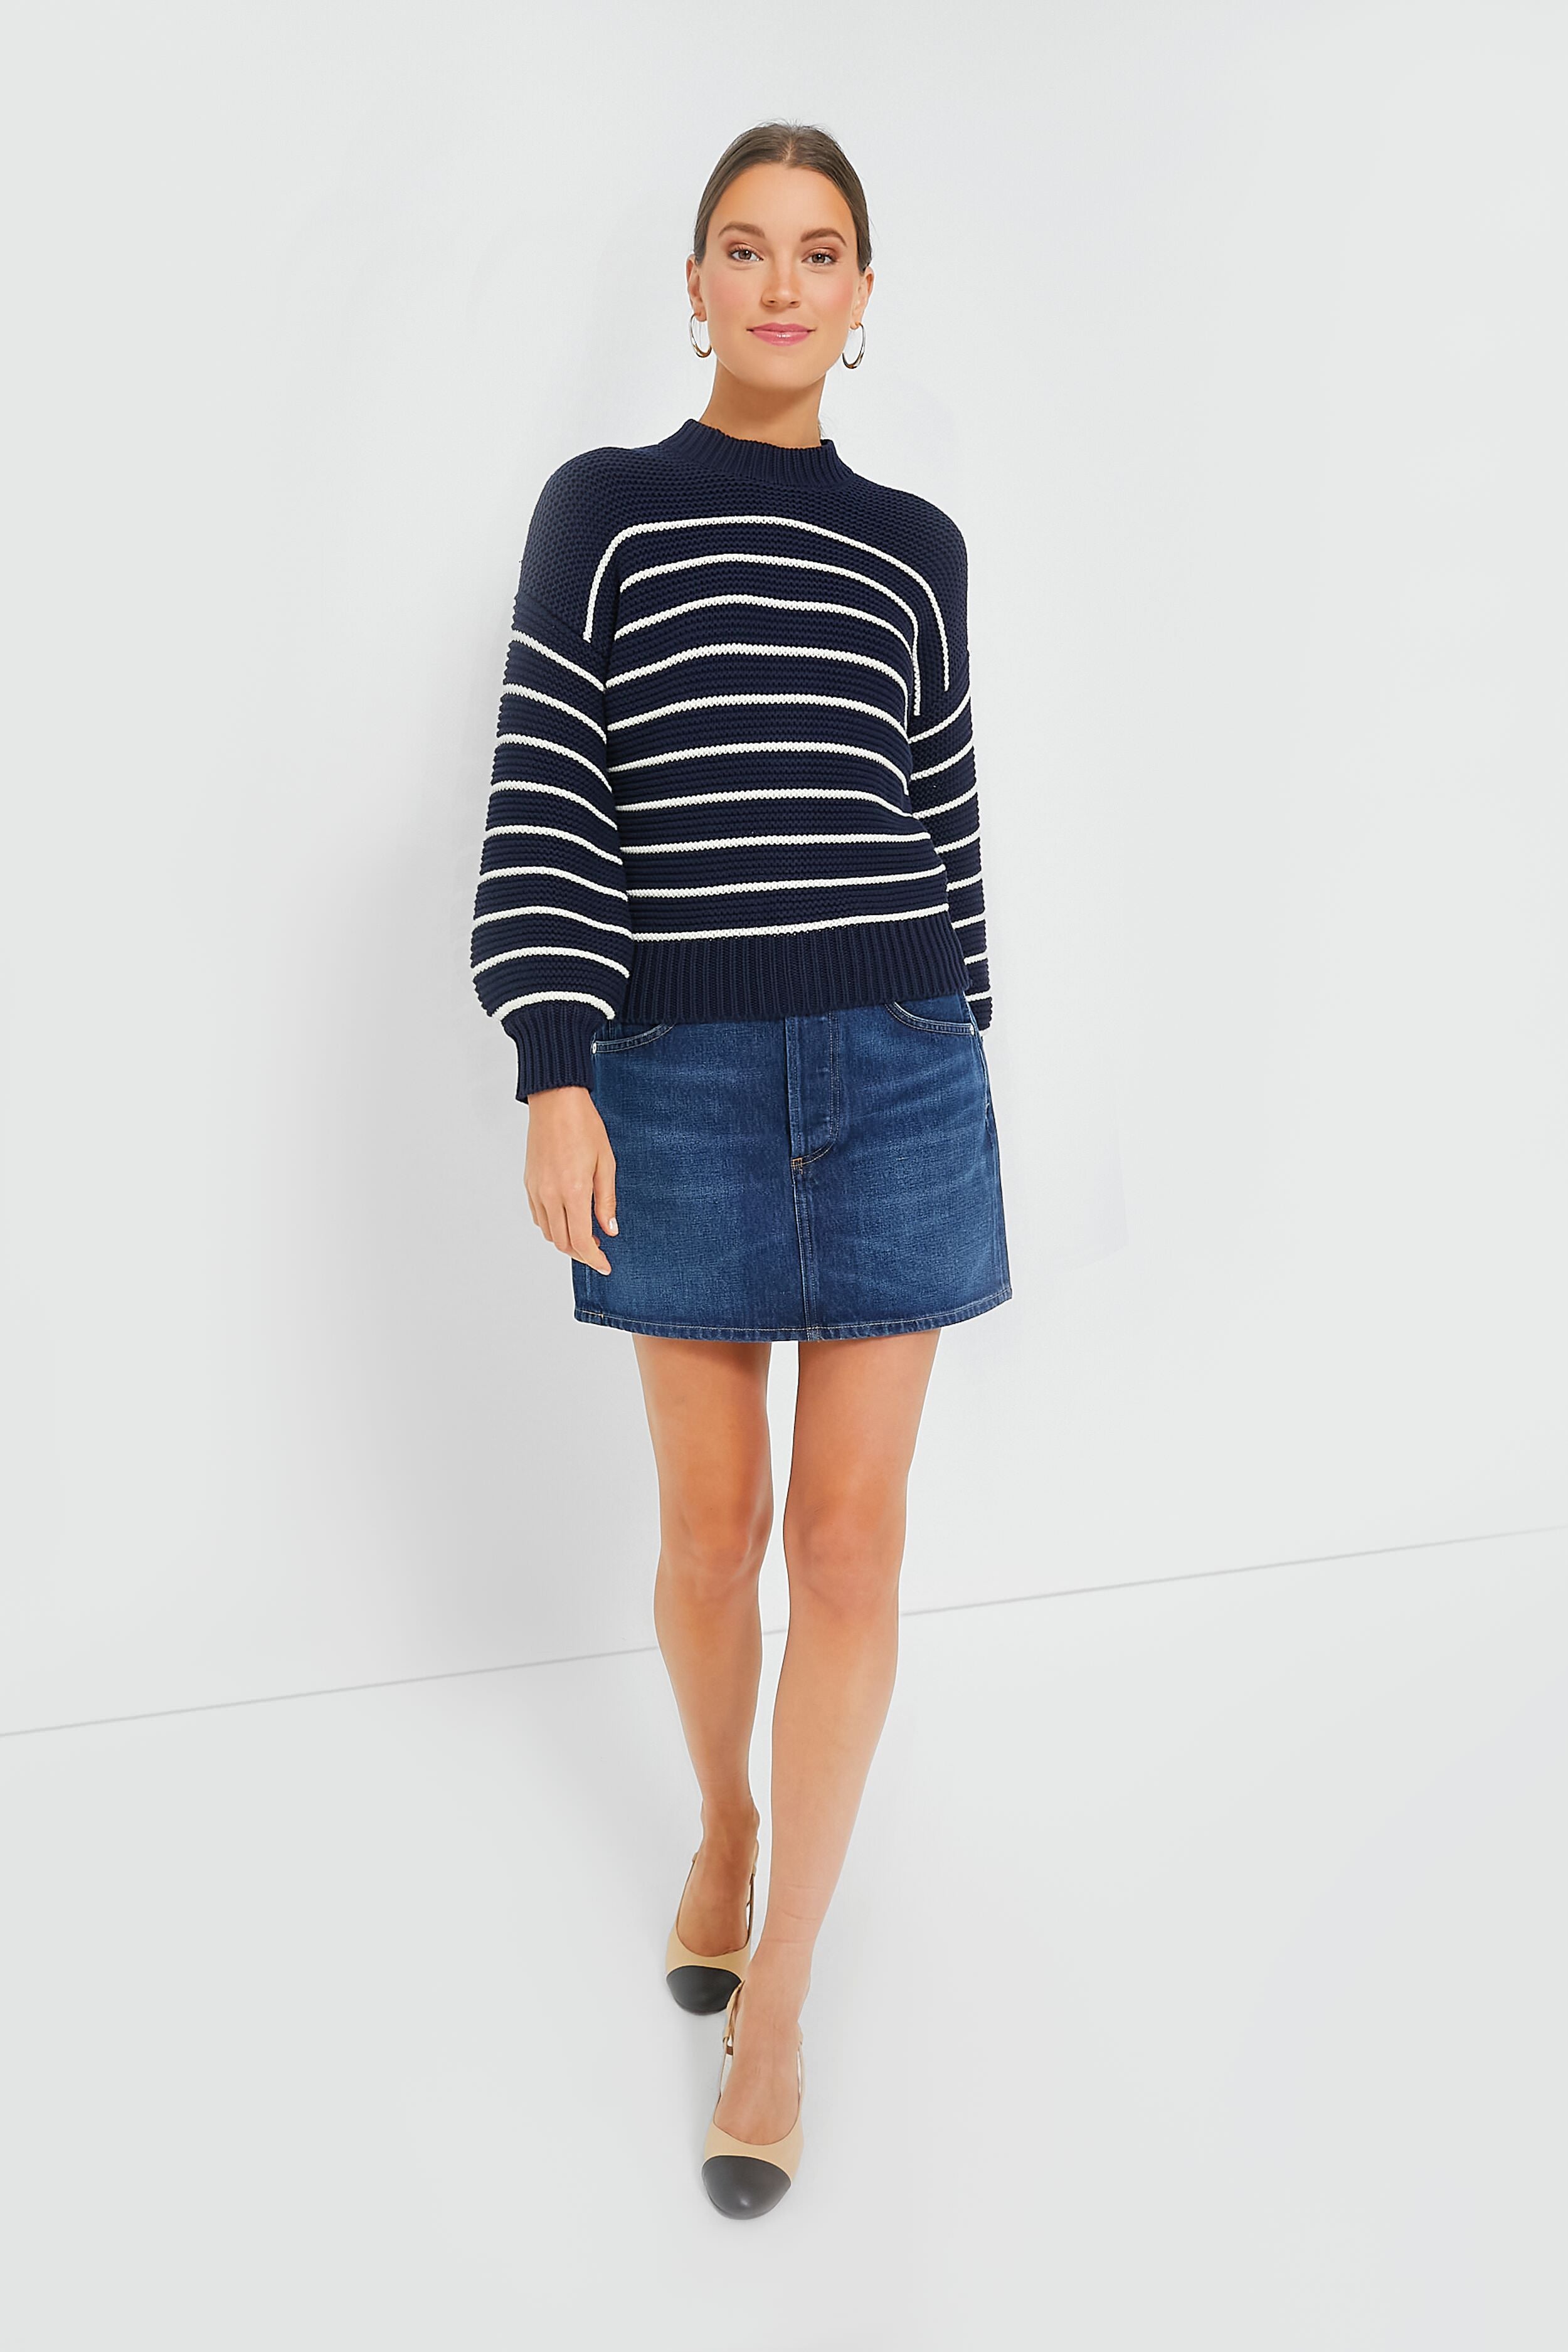 Pointelle Button Back Crew Sweater